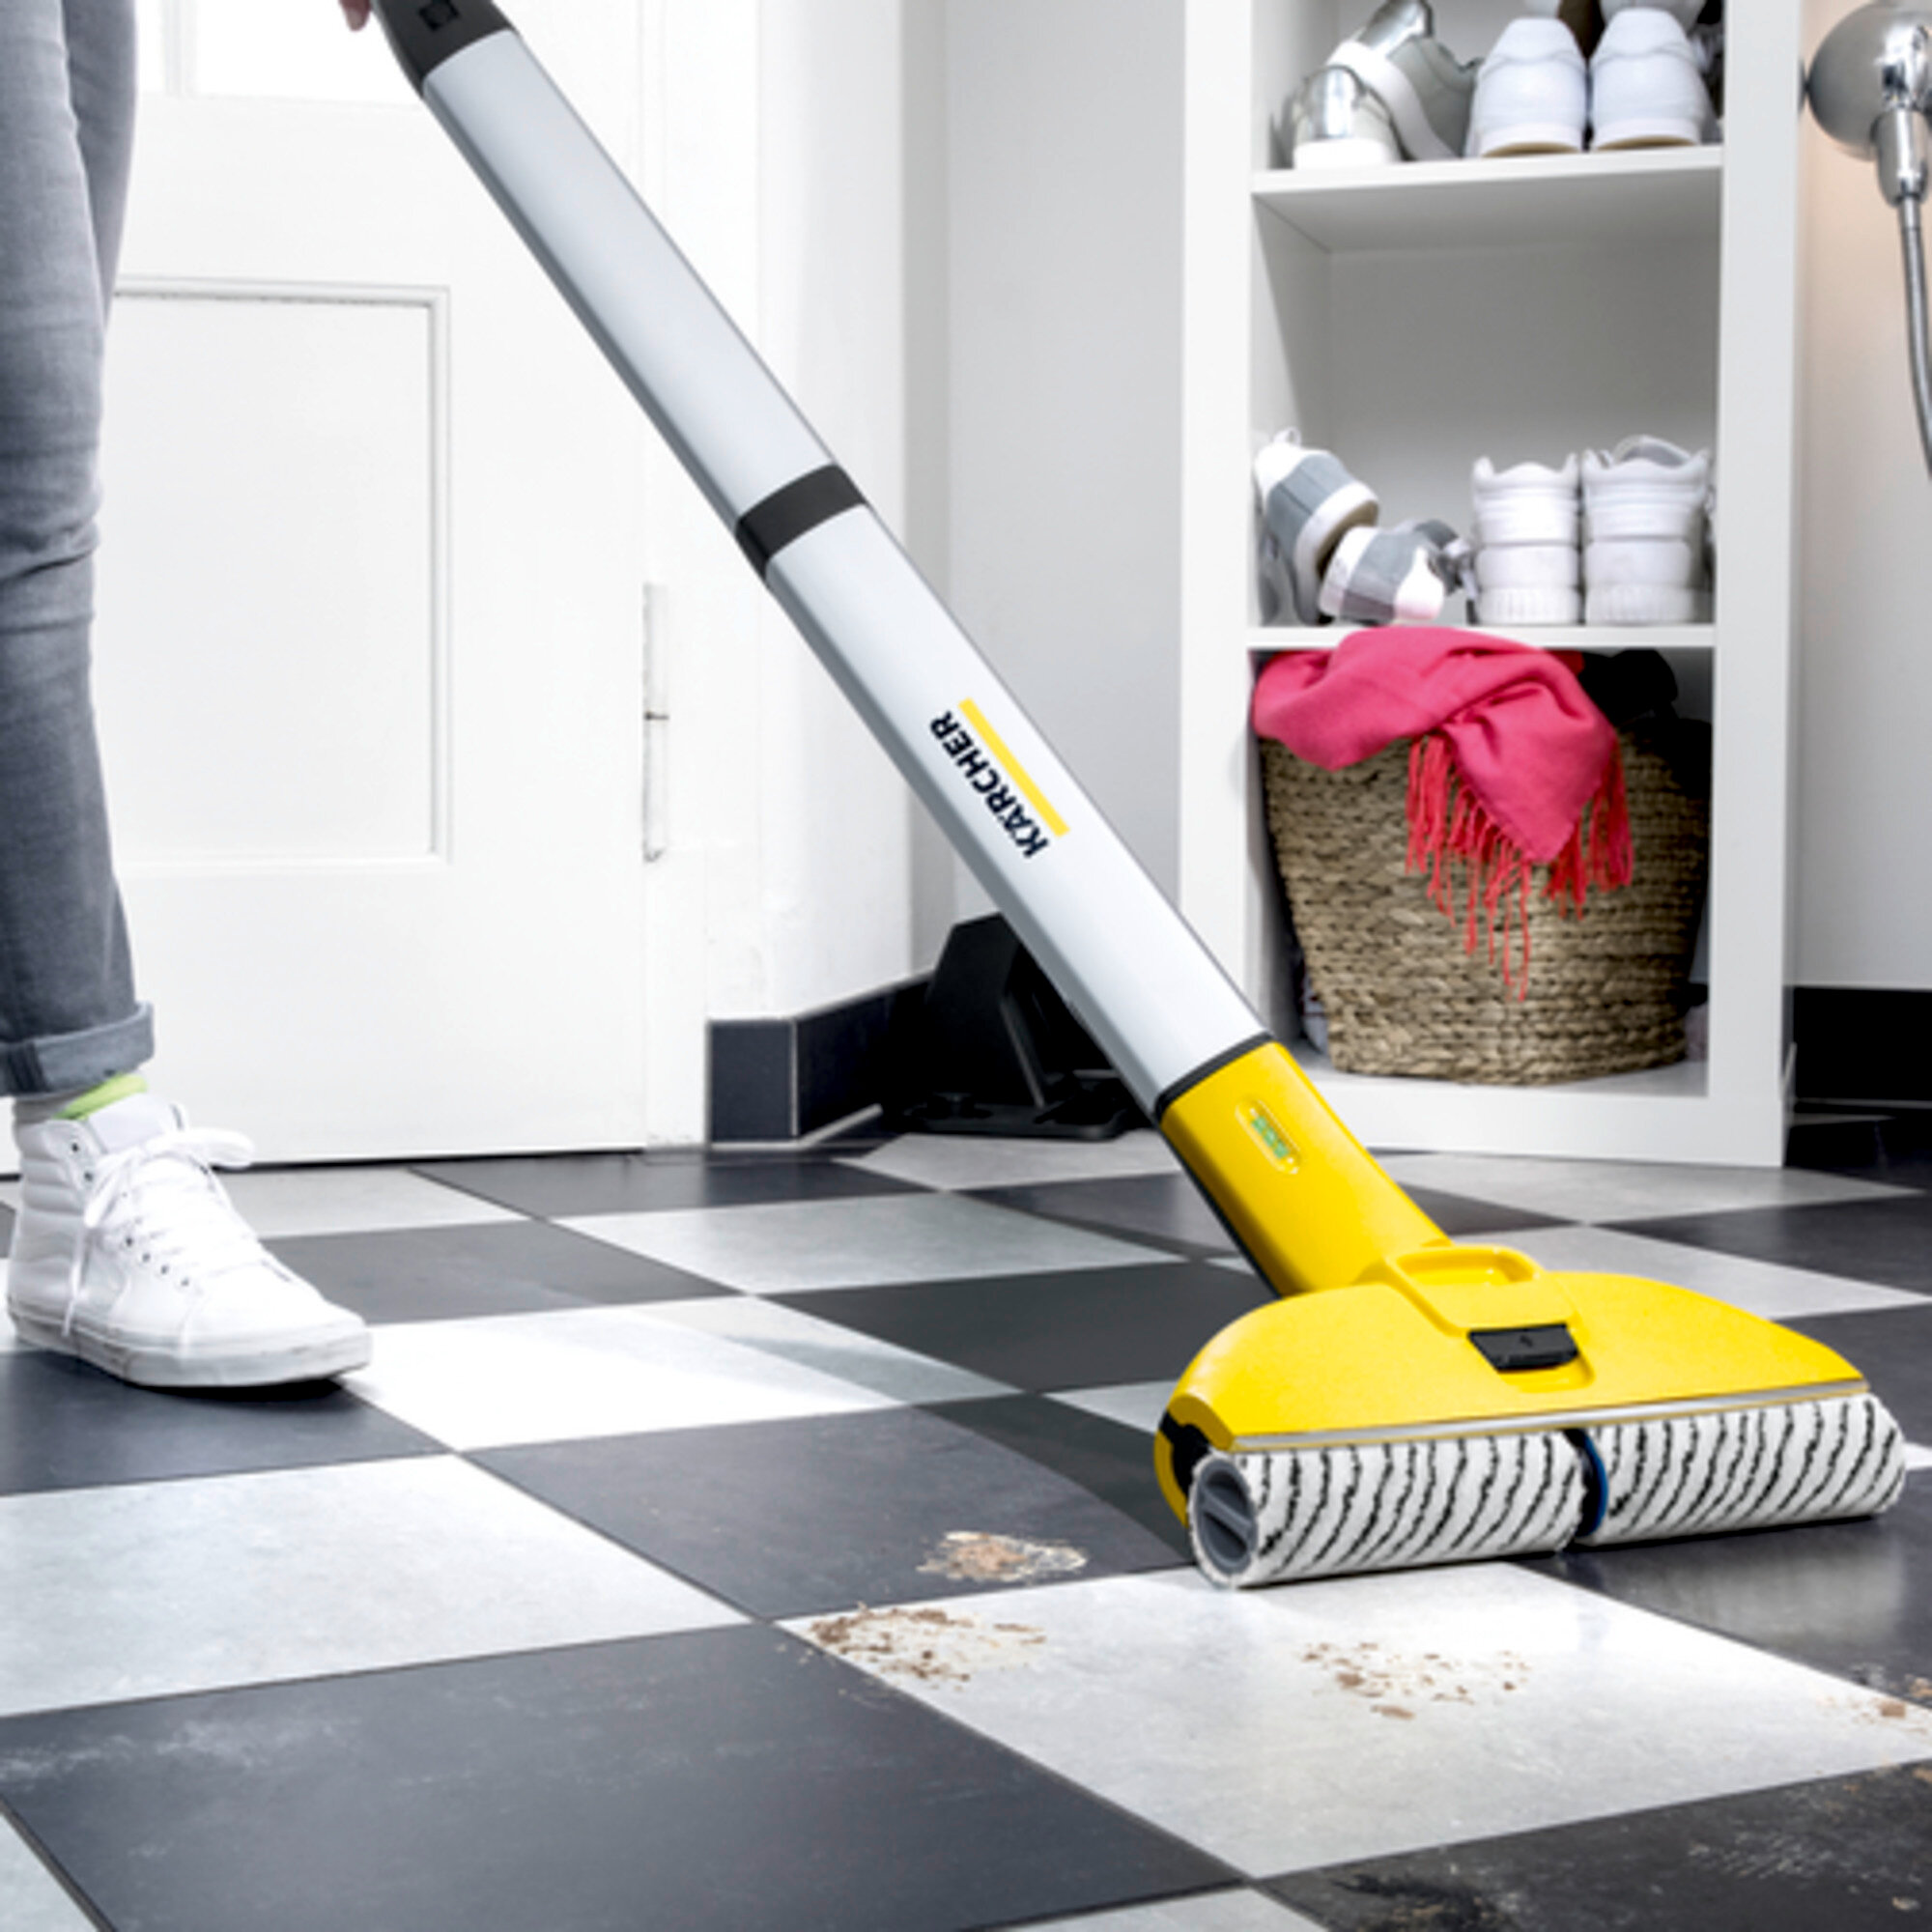 Hard floor cleaner FC 3 Cordless: Removes spills and dried on liquid.